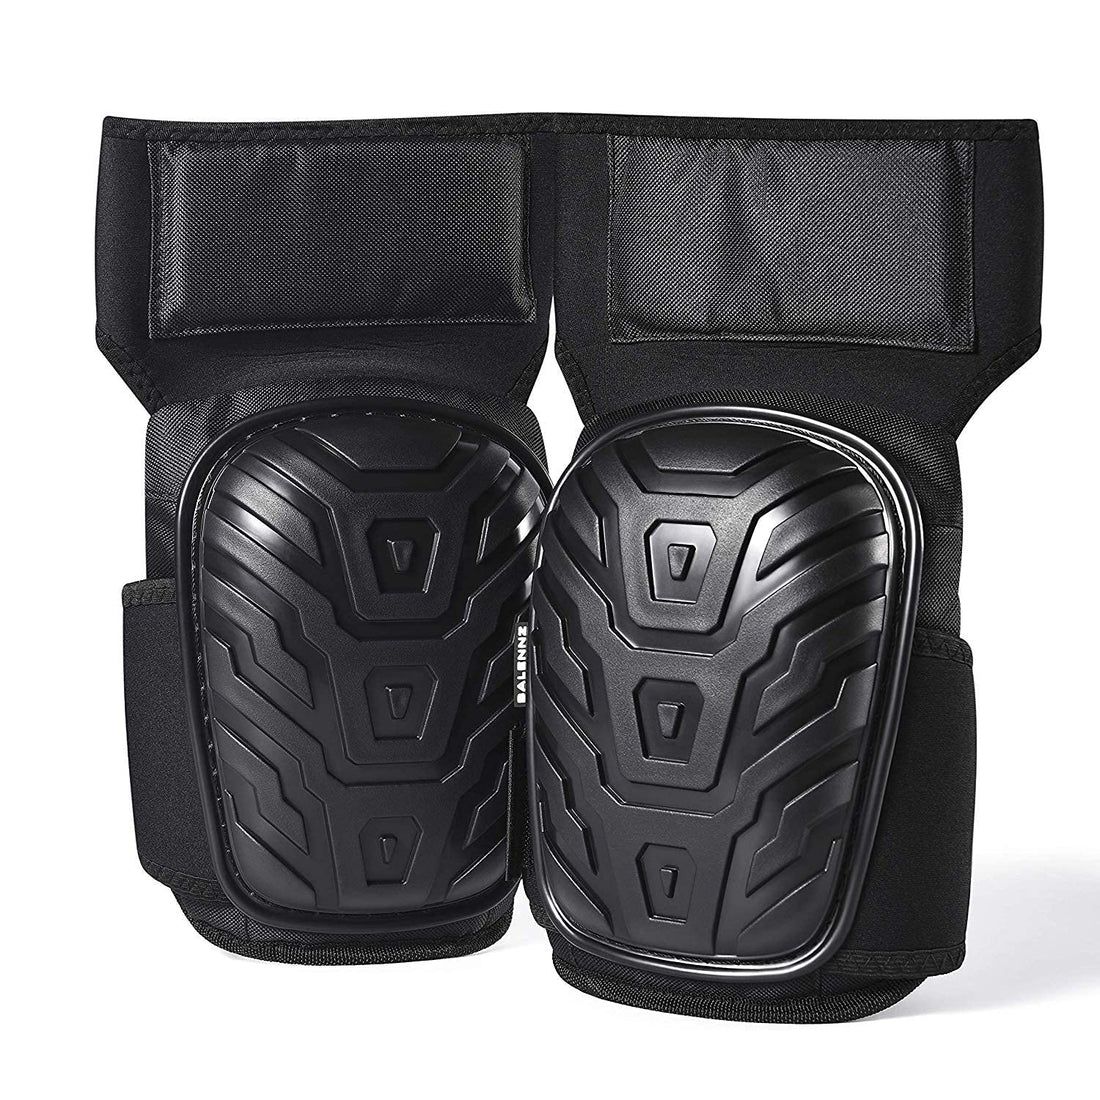 Professional Knee Pads for Work - Heavy Duty Foam Padding Gel Construction Knee Pads with Strong Double Straps – Comfortable Knee Protection for Indoor and Outdoor Use (Thigh High)